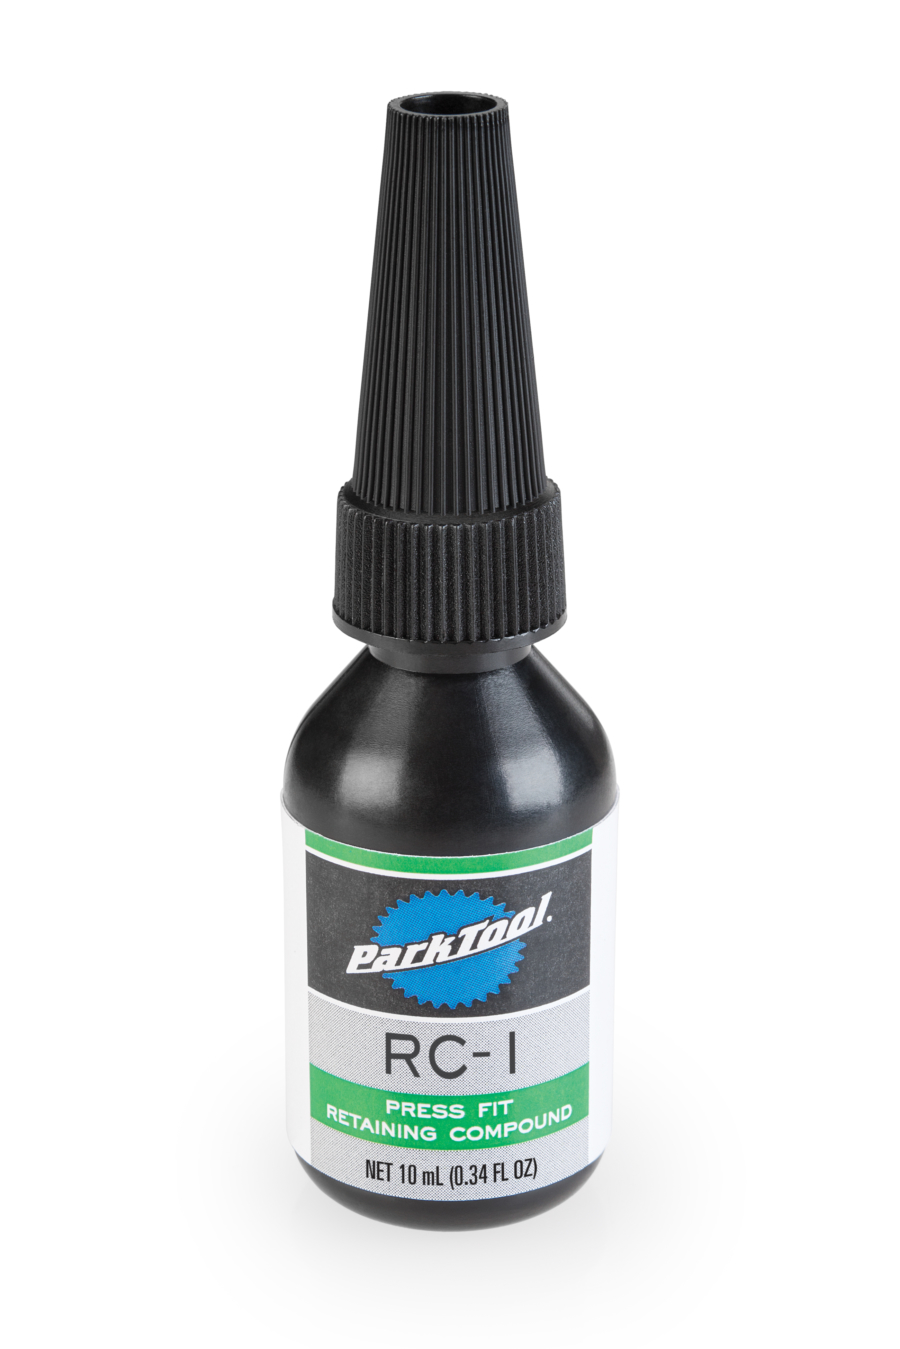 The Park Tool RC-1 Press Fit Retaining Compound, enlarged